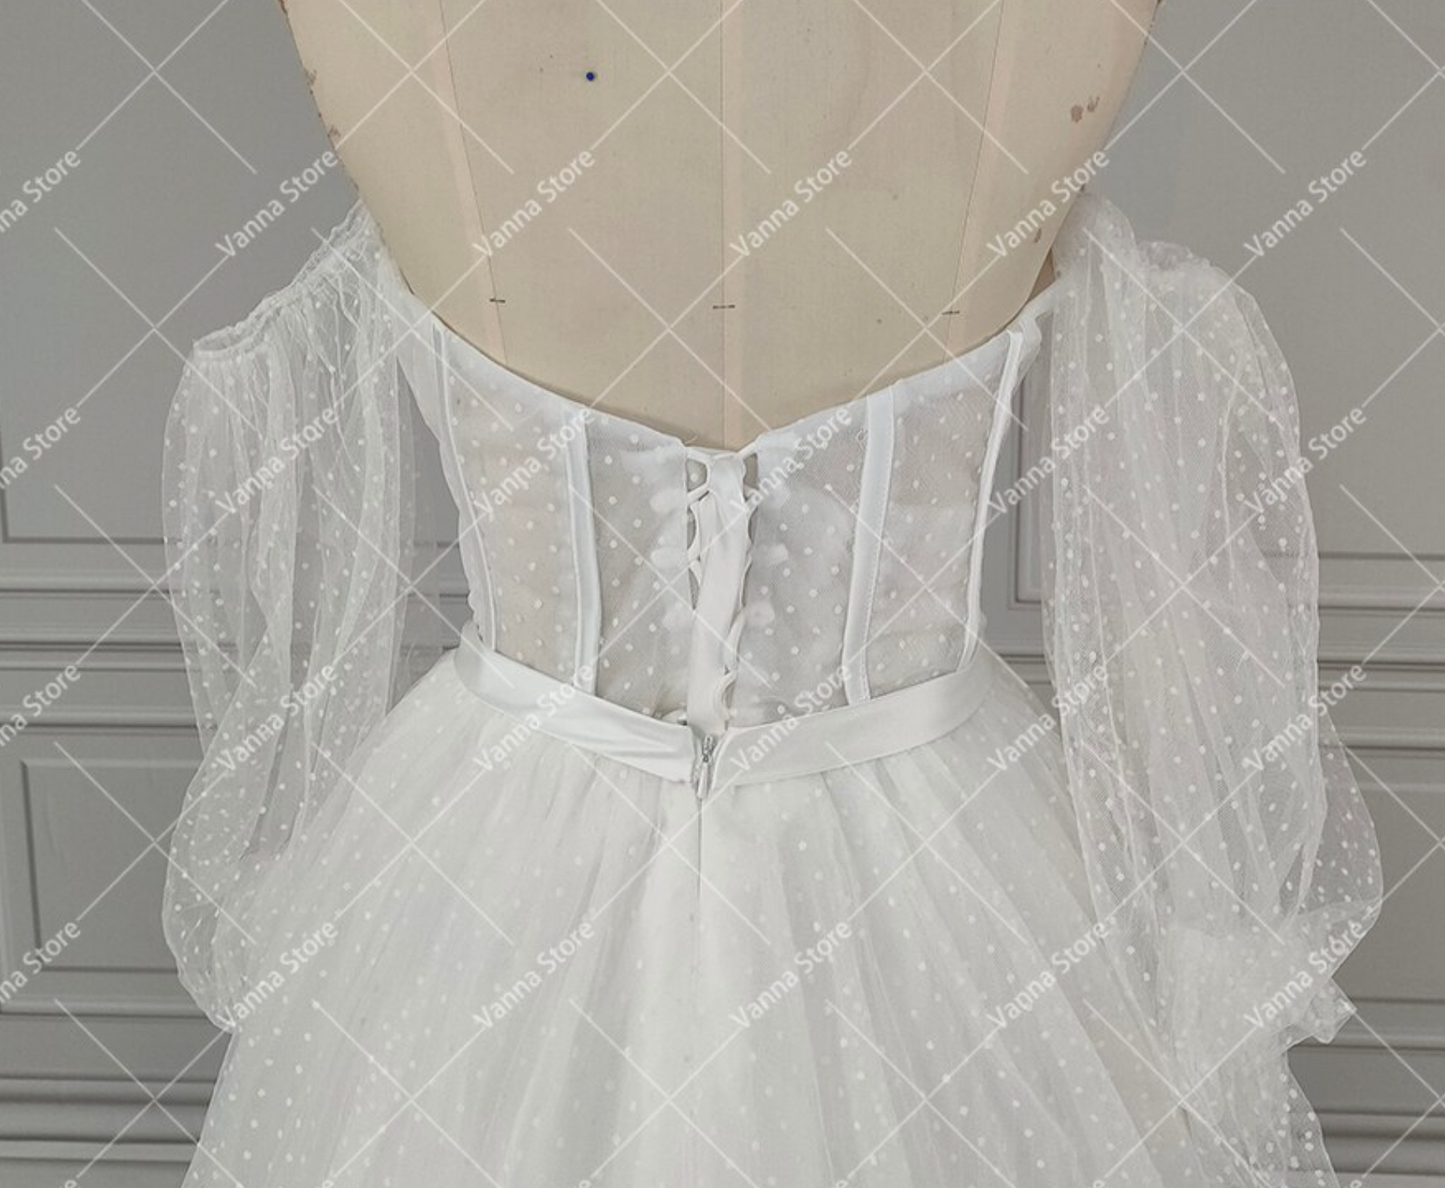 Load image into Gallery viewer, Lantern Sleeve Sweetheart Polka Dot Tulle A Line Wedding Dress
